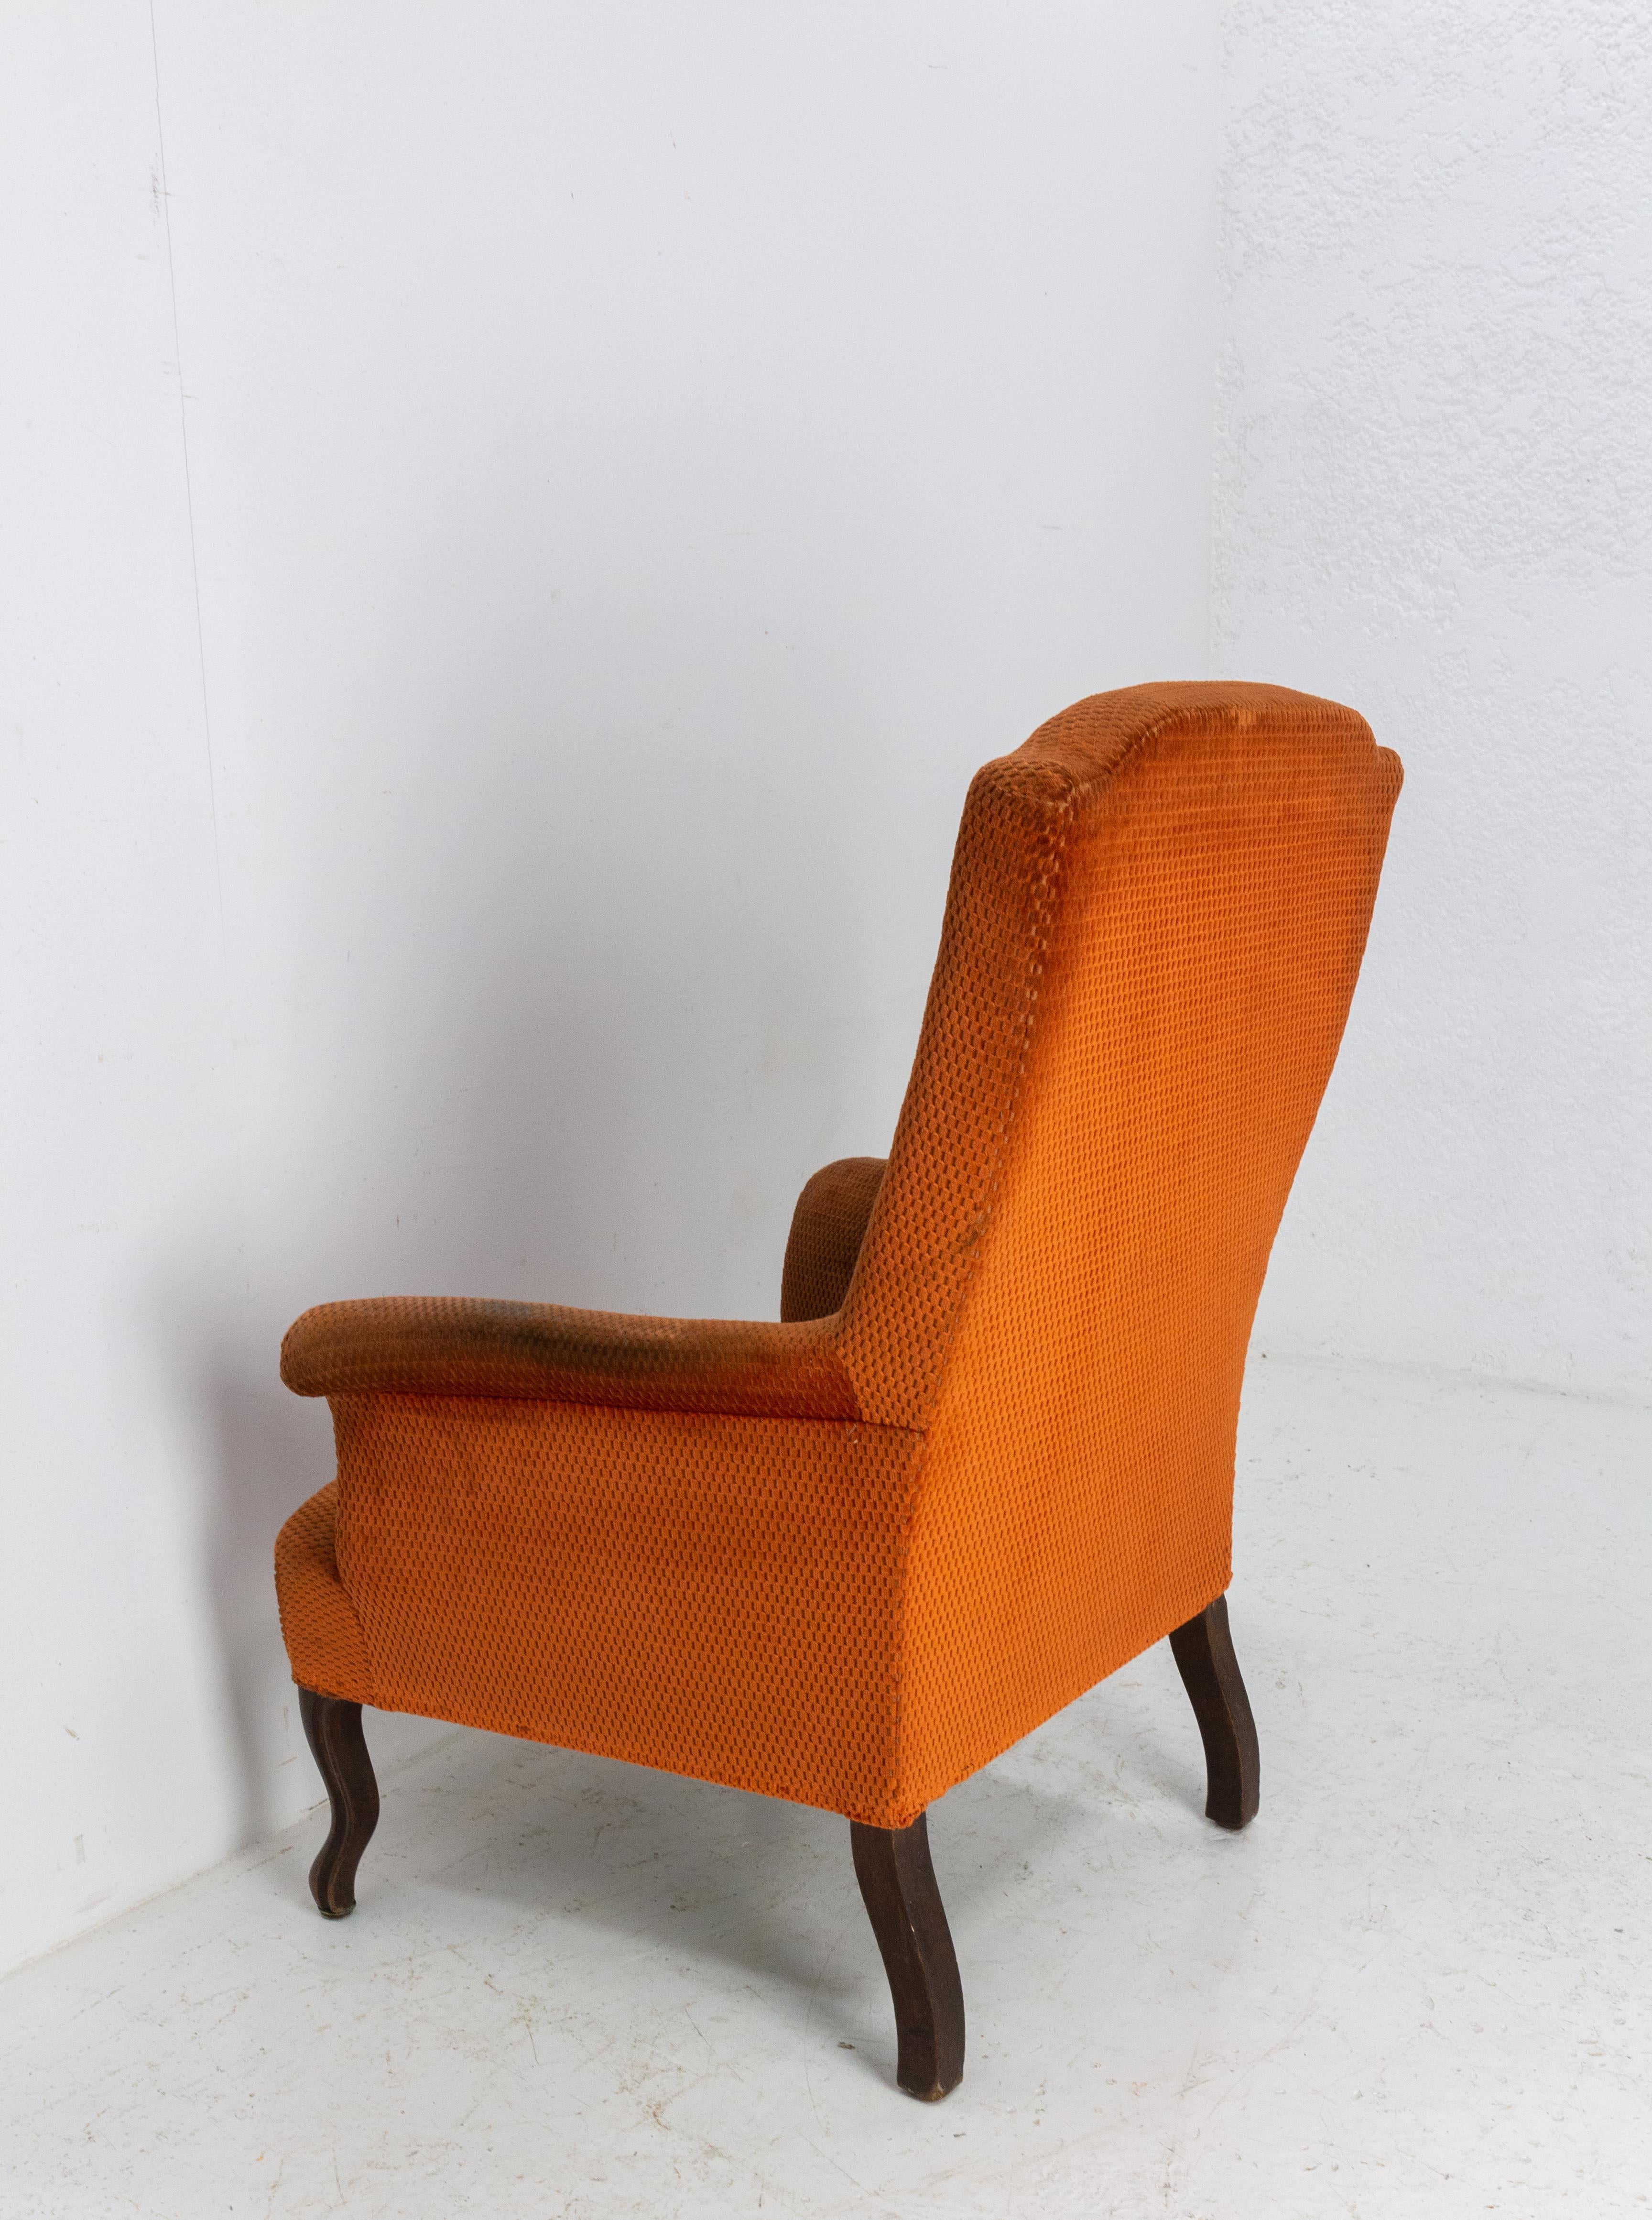 Late 19th Century Antique Armchair Fauteuil Napoleon III Upholstery and Walnut French 19th Century